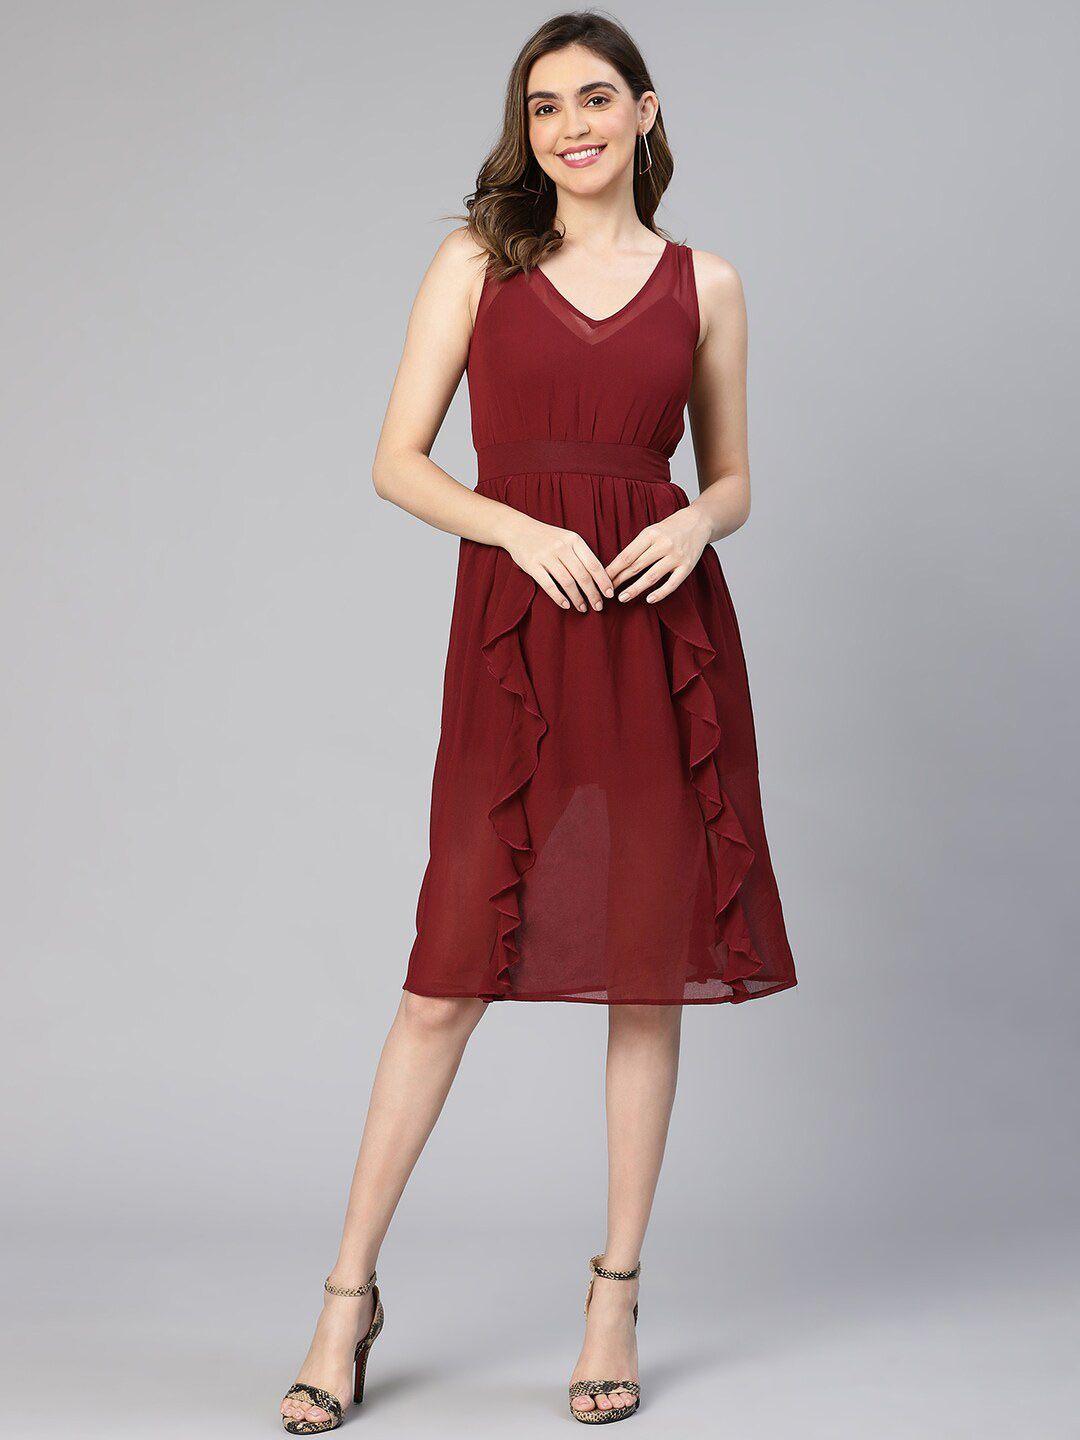 oxolloxo maroon a-line dress